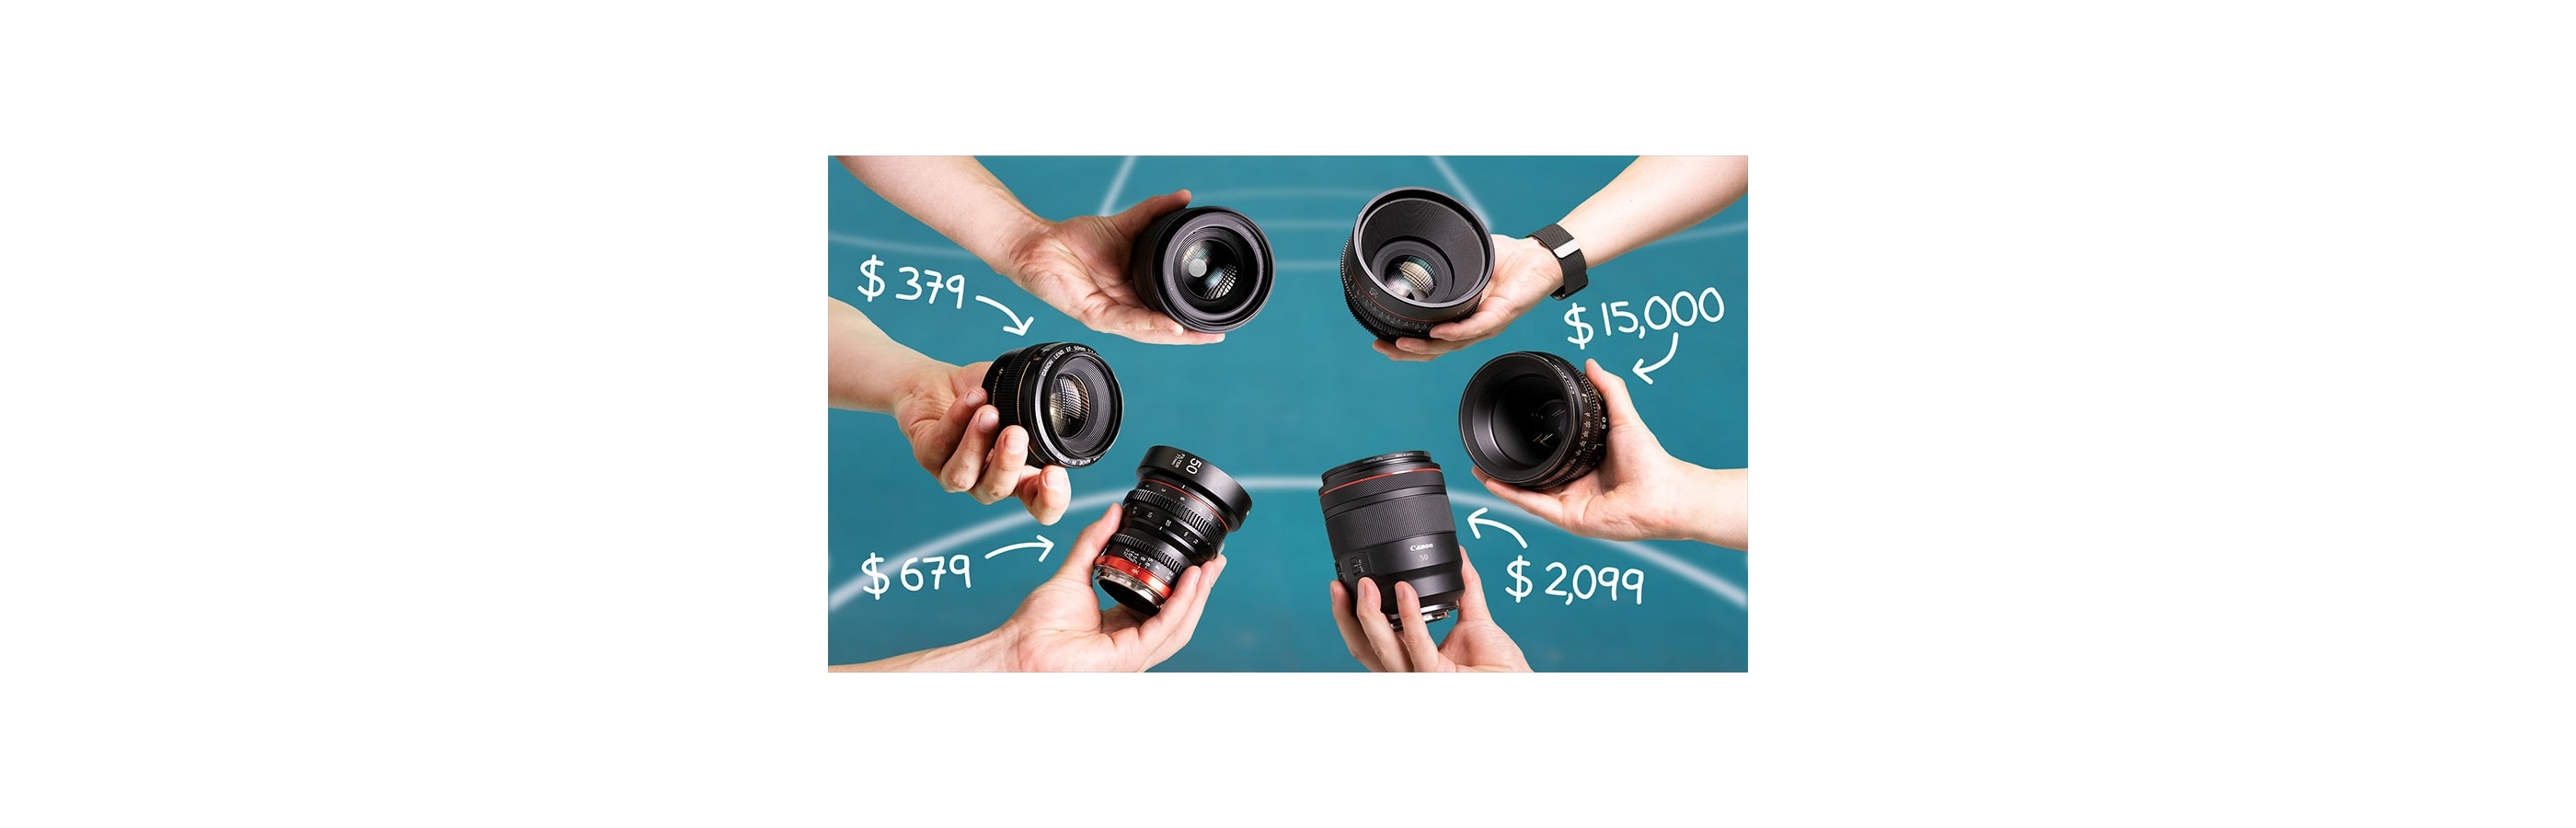 Prime lens - The 6 Most Important Features to Consider When Buying